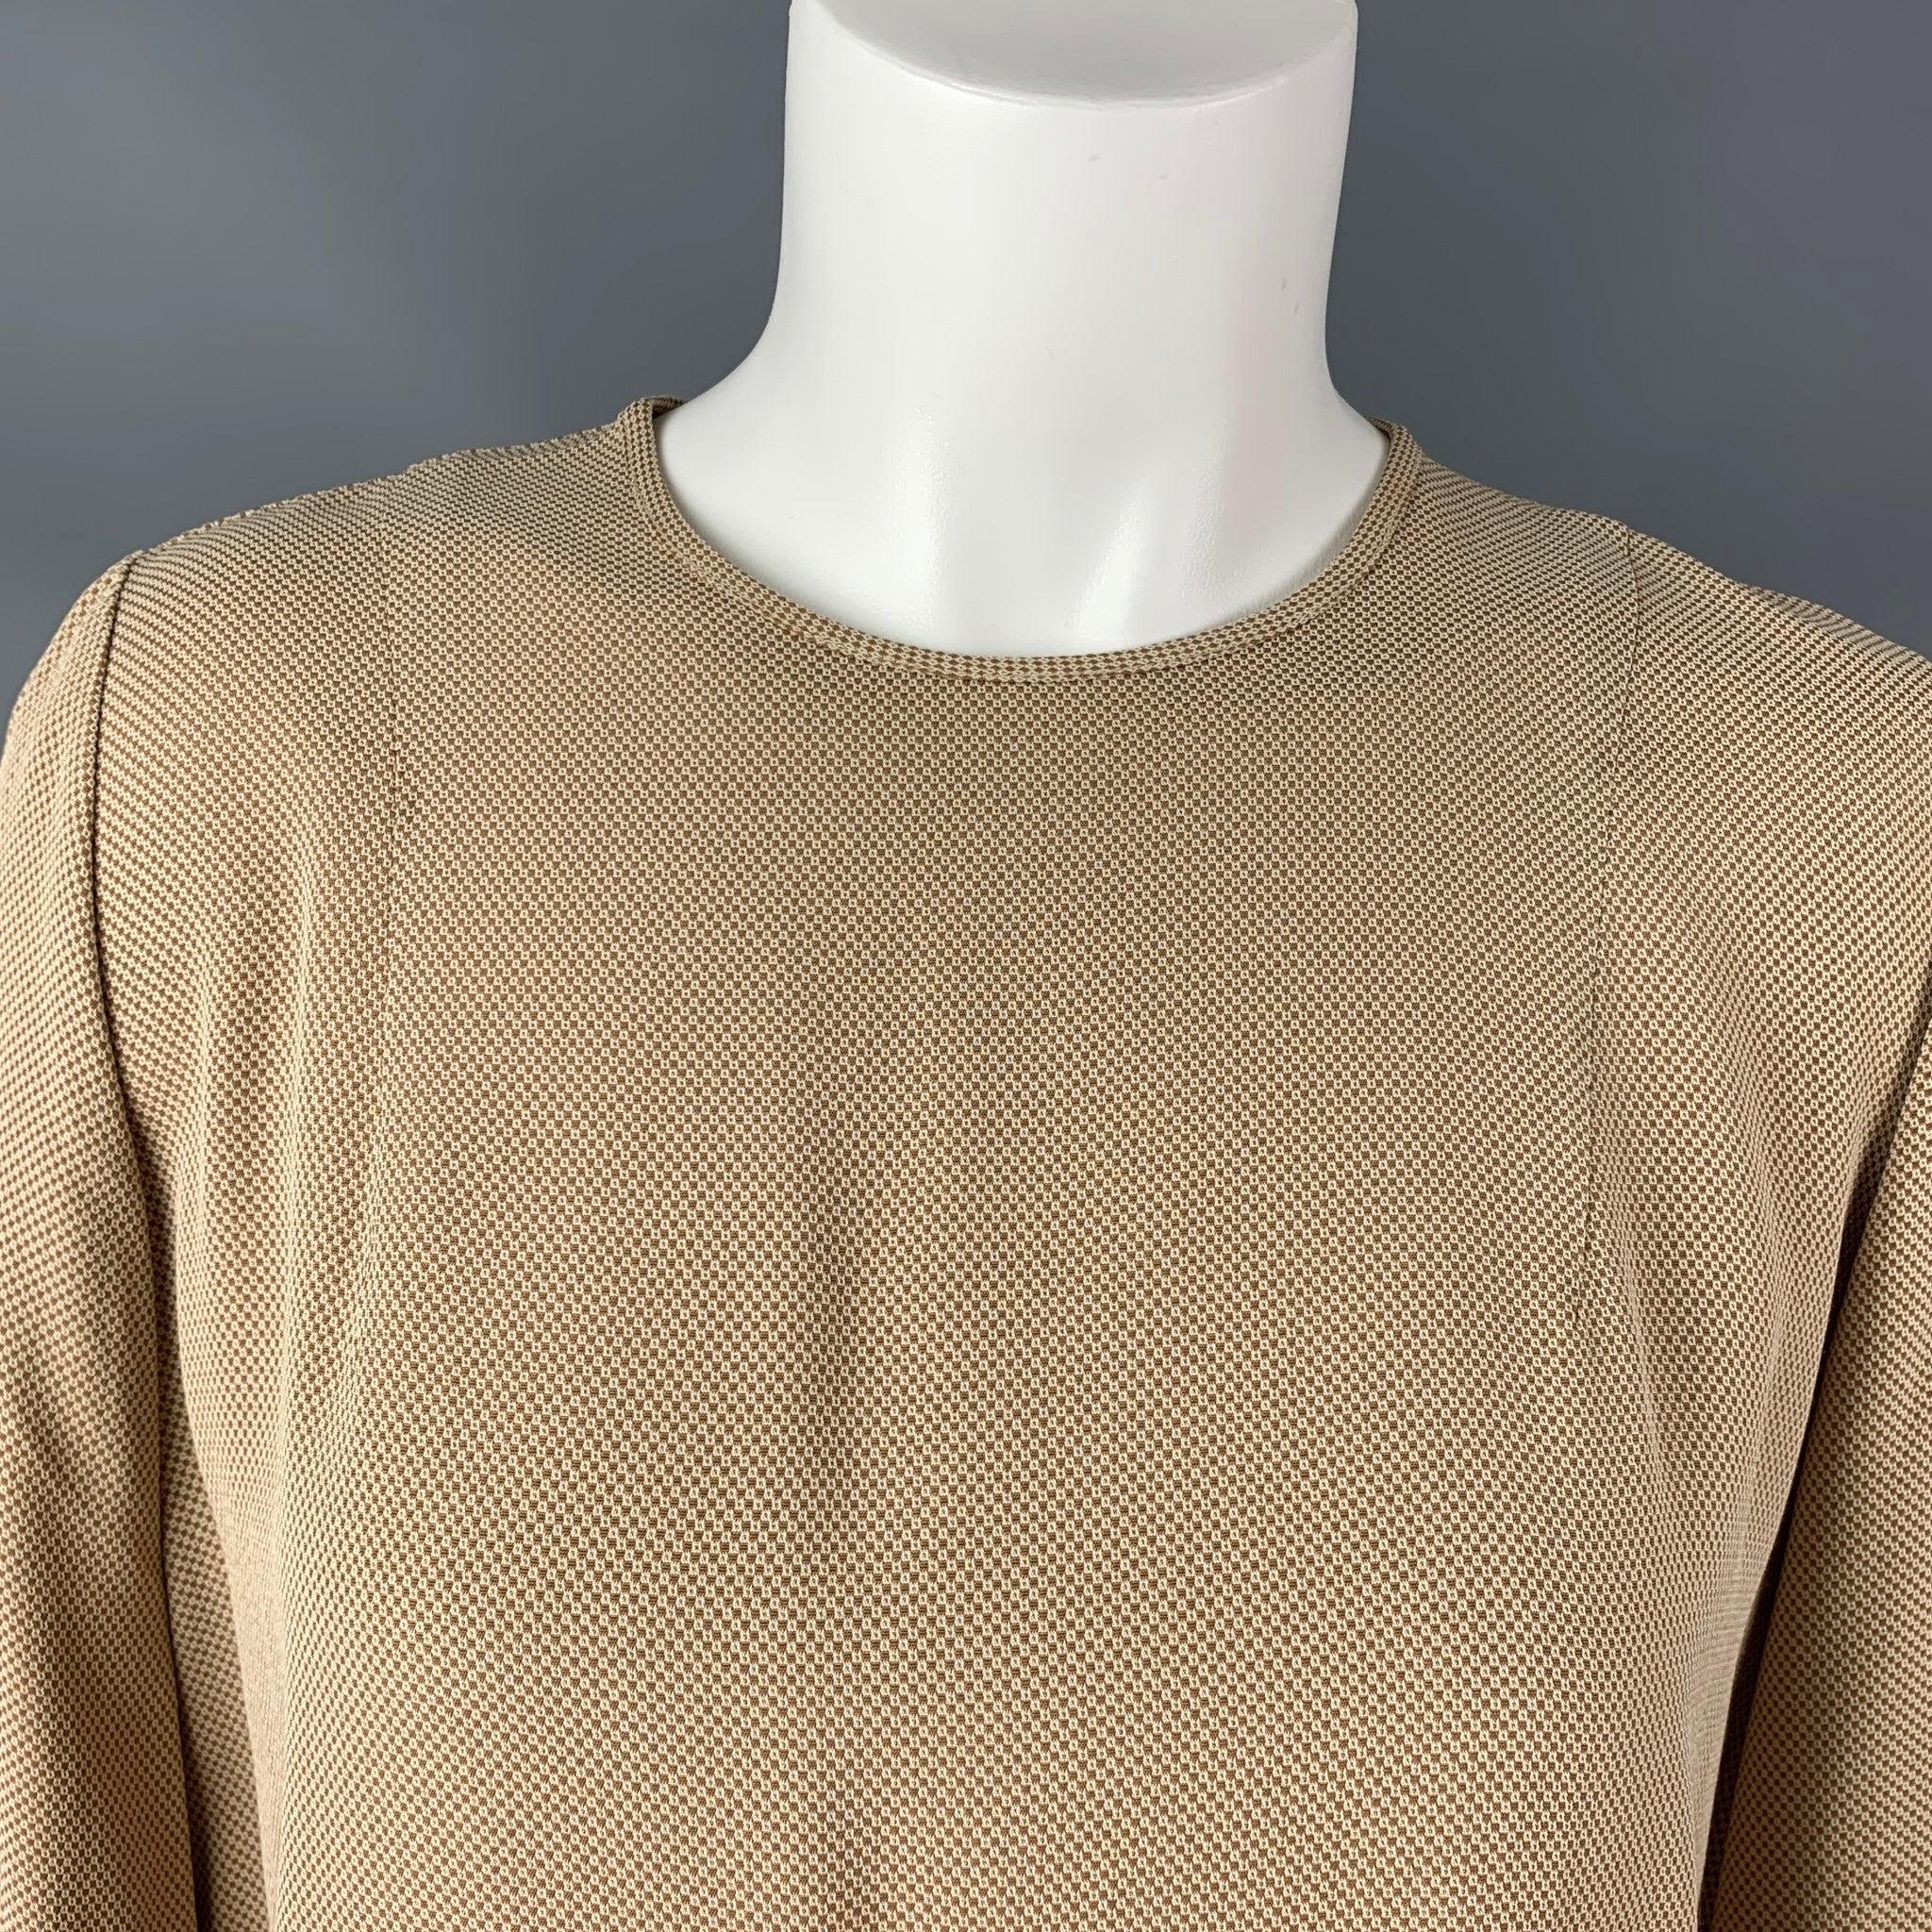 Vintage GIORGIO ARMANI long sleeve blouse comes in beige viscose and acetate fabric features a micro checker / square print, crew neck, quarter button up closure. Made in Italy.Very Good Pre-Owned Condition. 

Marked:   42 

Measurements: 
